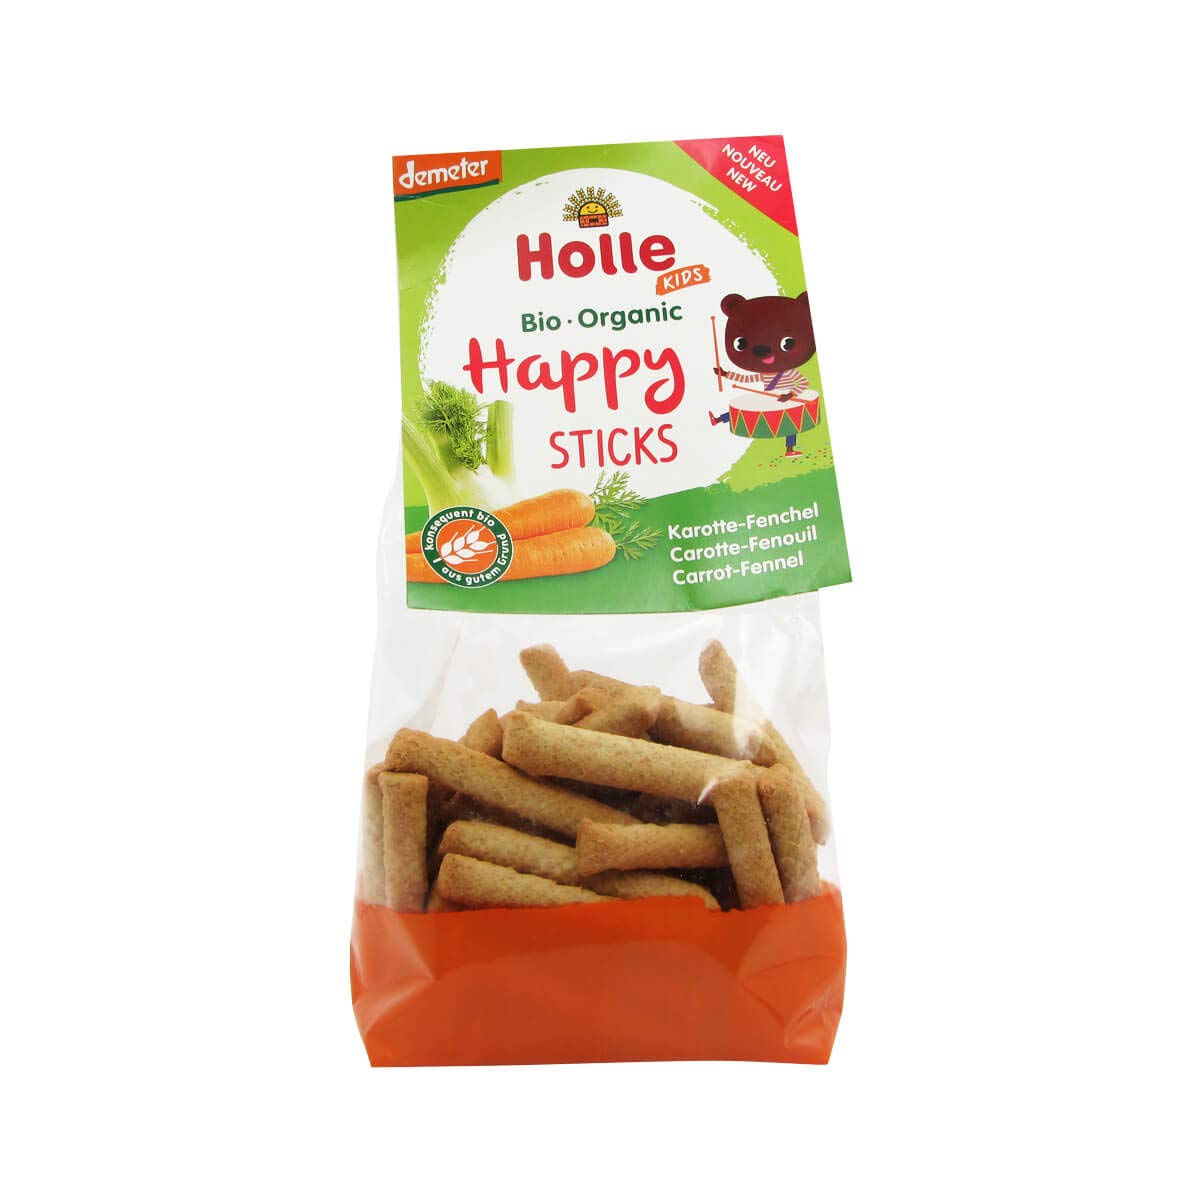 Holle Bio Happy Sticks Organic Carrot and Fennel 100g